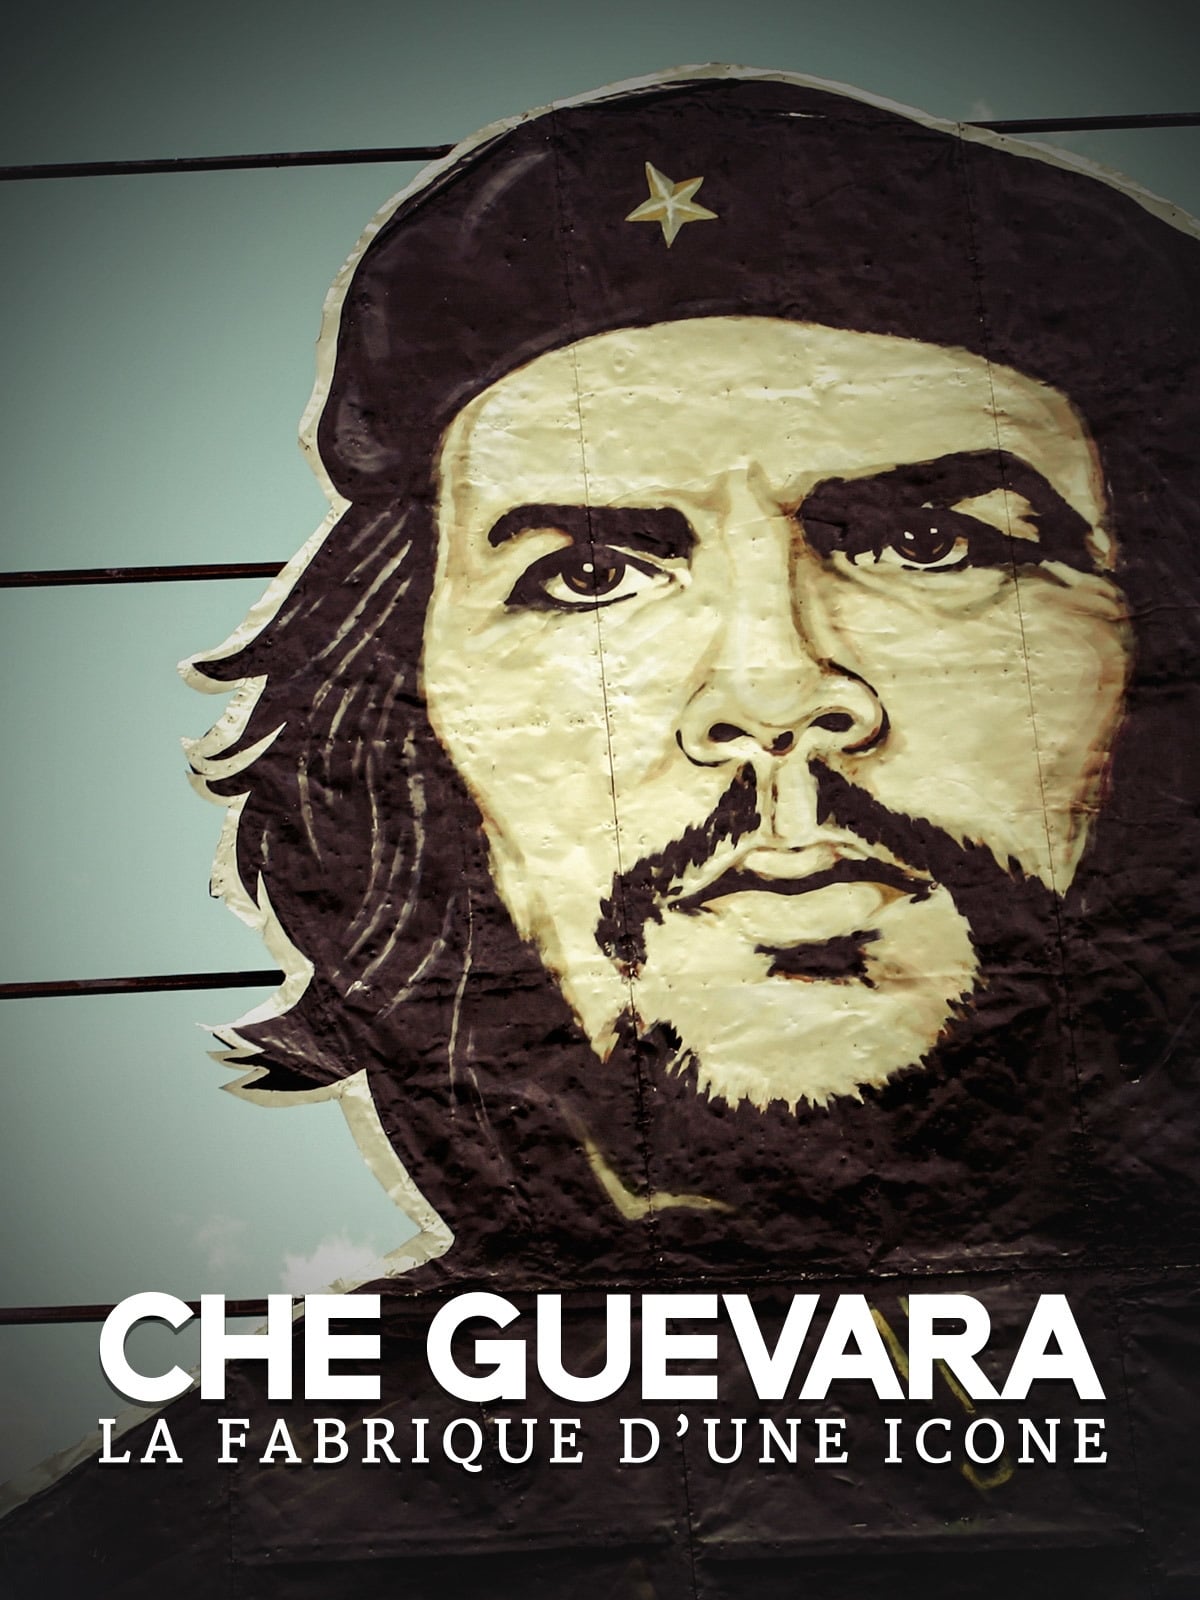 Che Guevara: The making of an icon